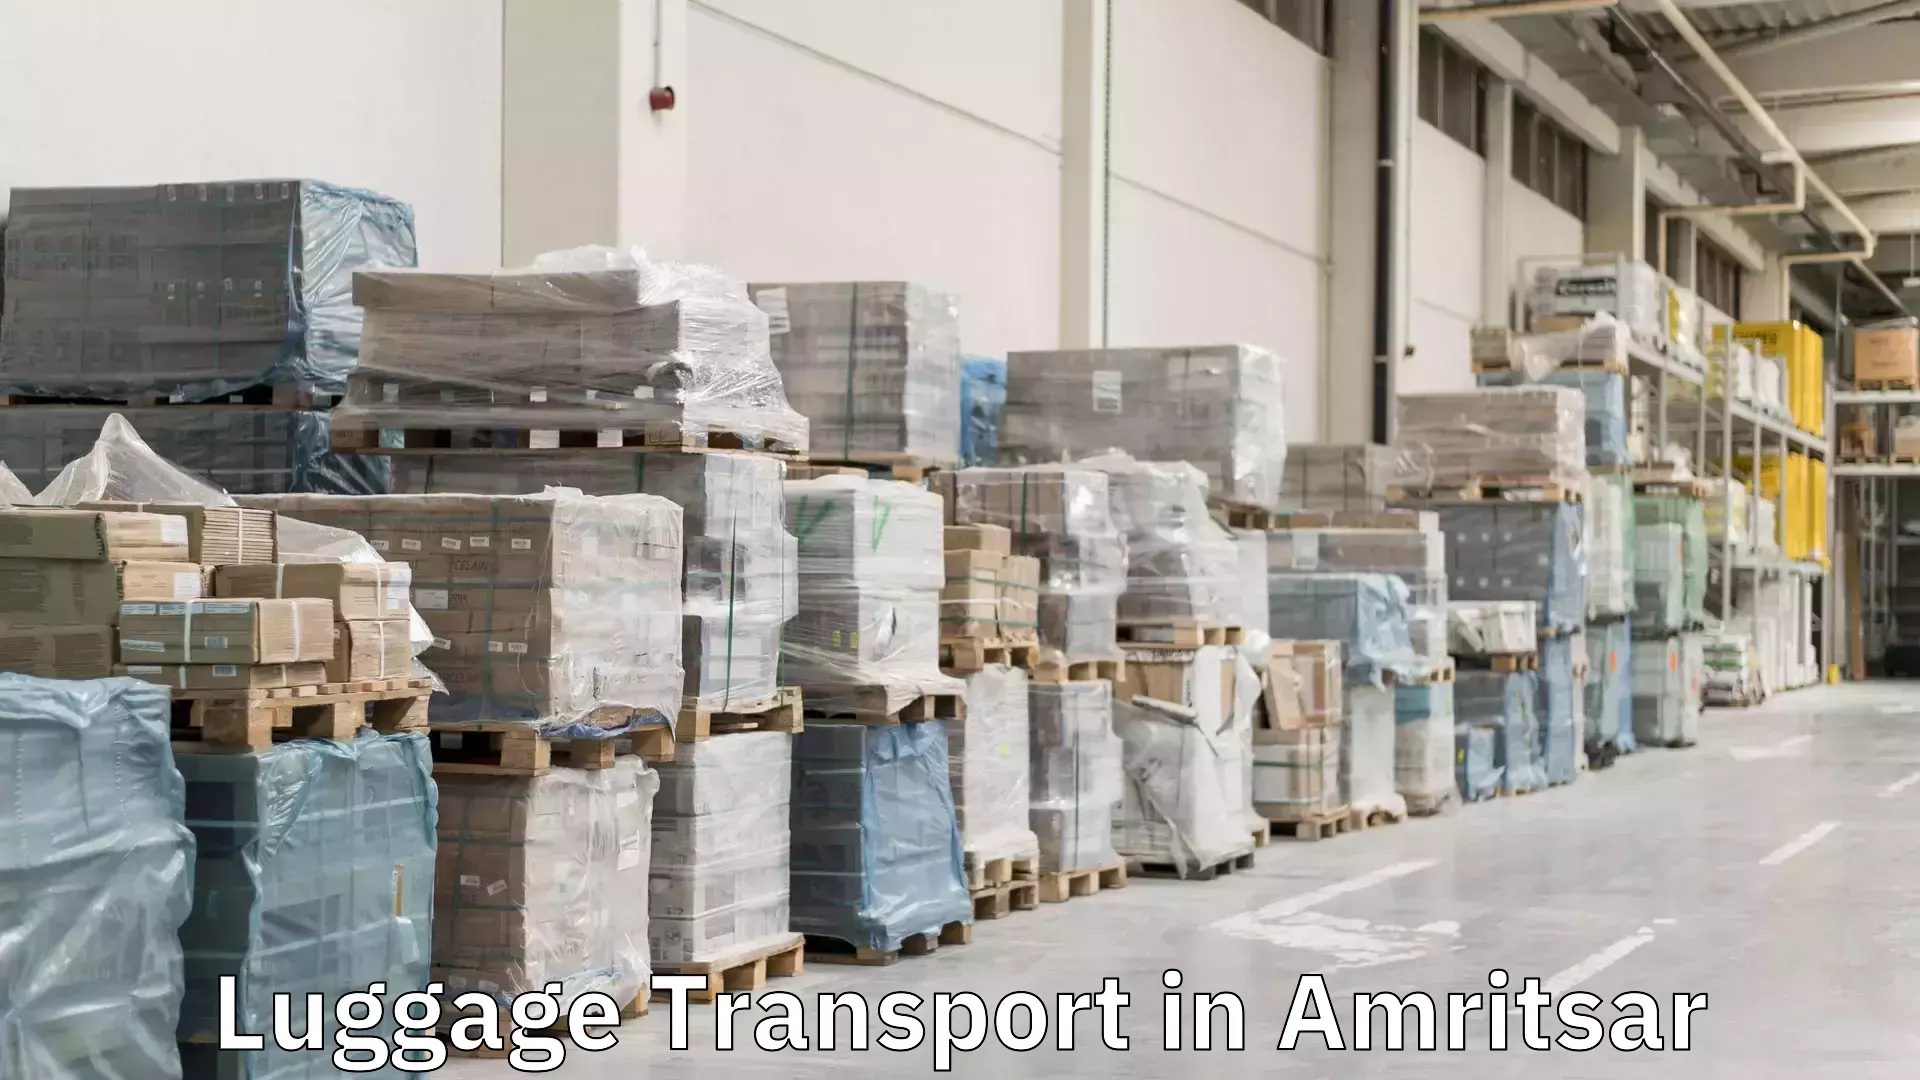 Baggage transport technology in Amritsar